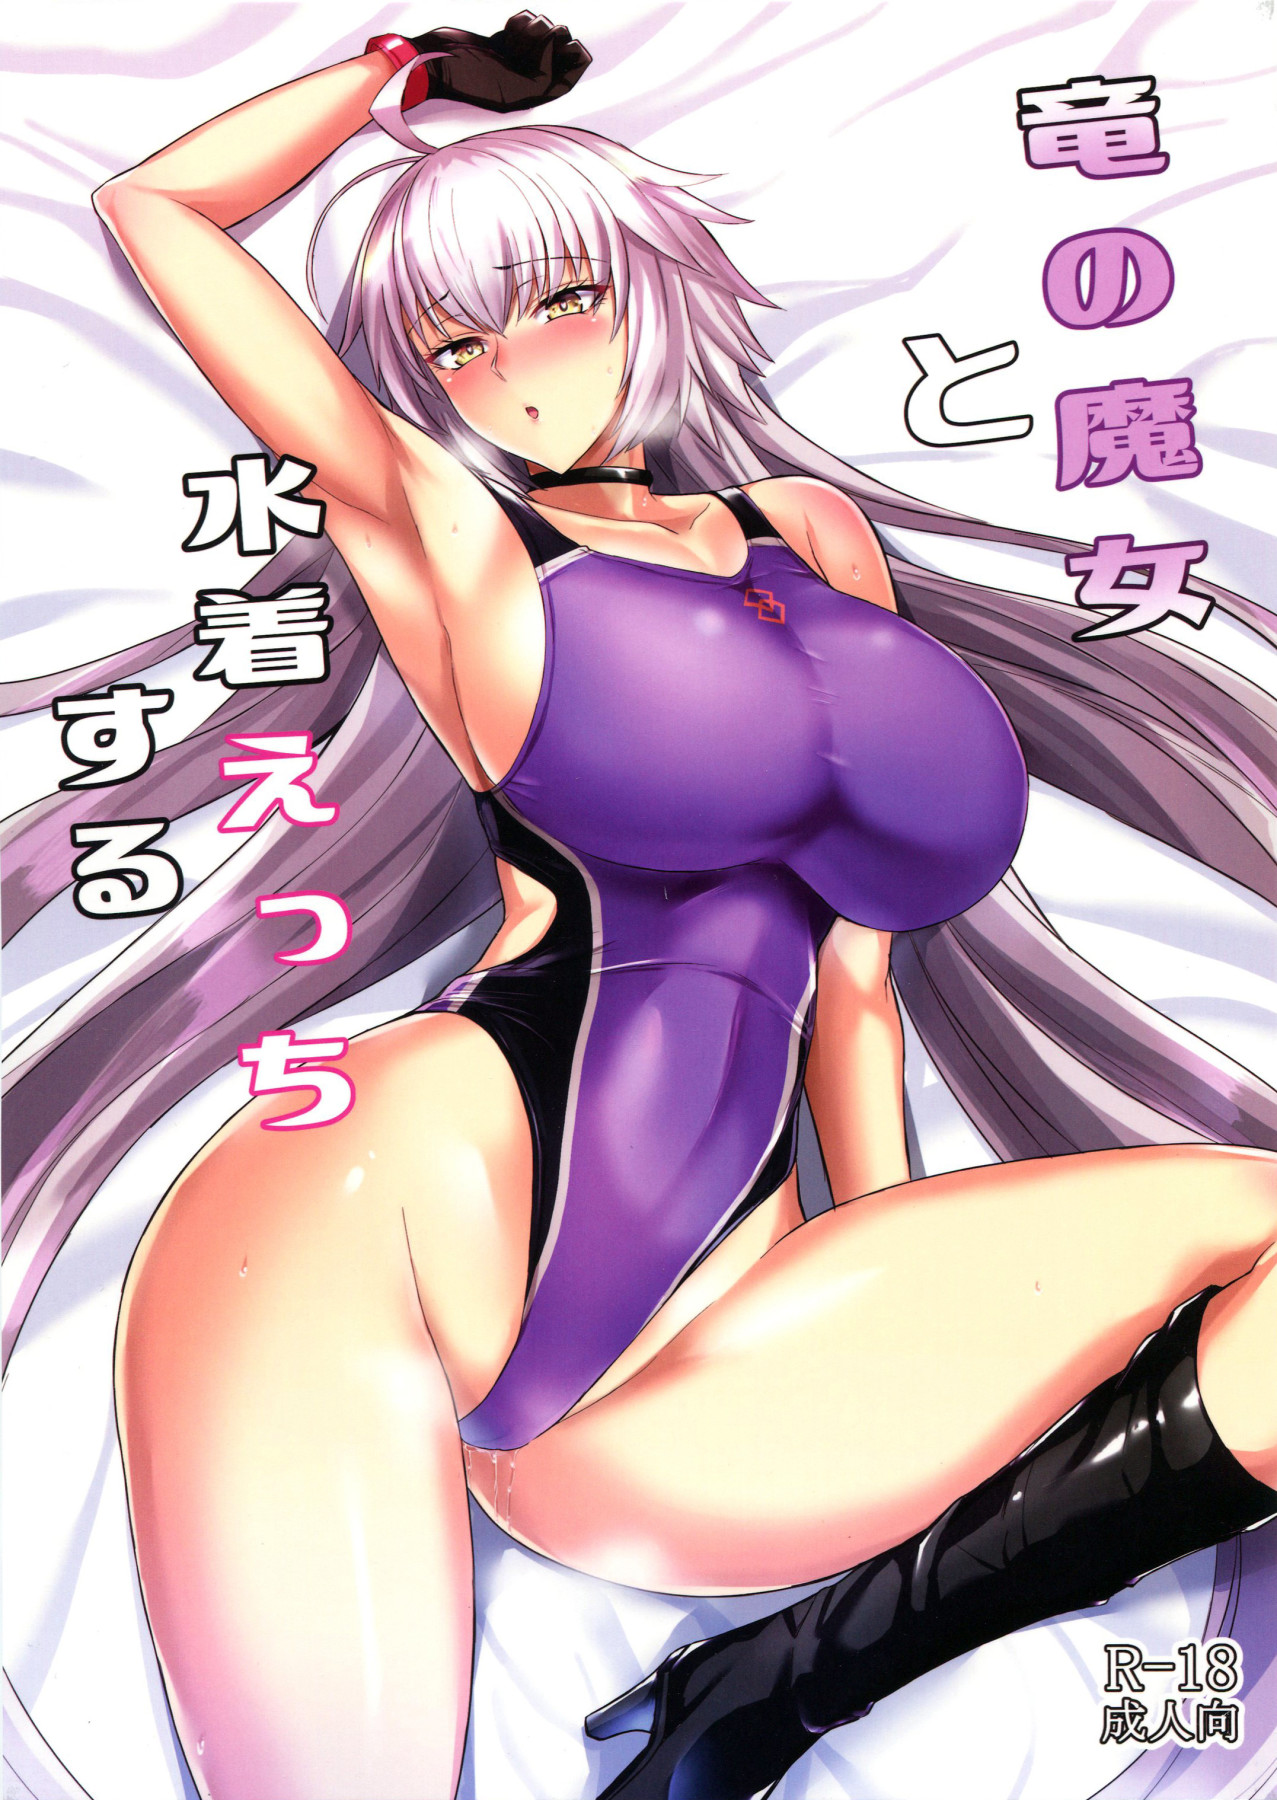 Hentai Manga Comic-Swimsuit Sex With The Dragon Witch-Read-1